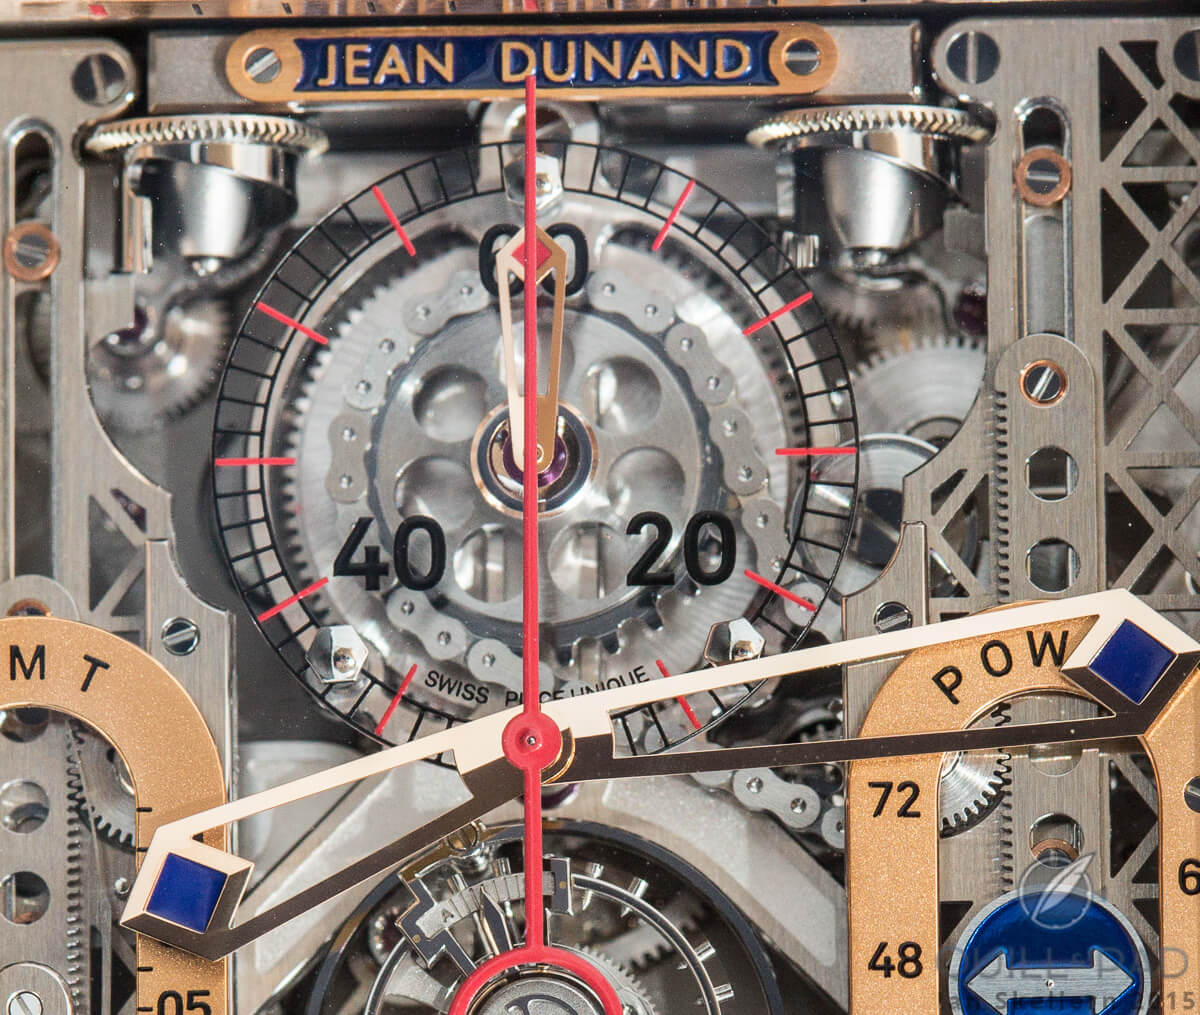 The chain that drives the power reserve indicator coming from the gear under the 60-minute chronograph counter; note the exquisitely crafted hour and minute hands on the Jean Dunand Palace